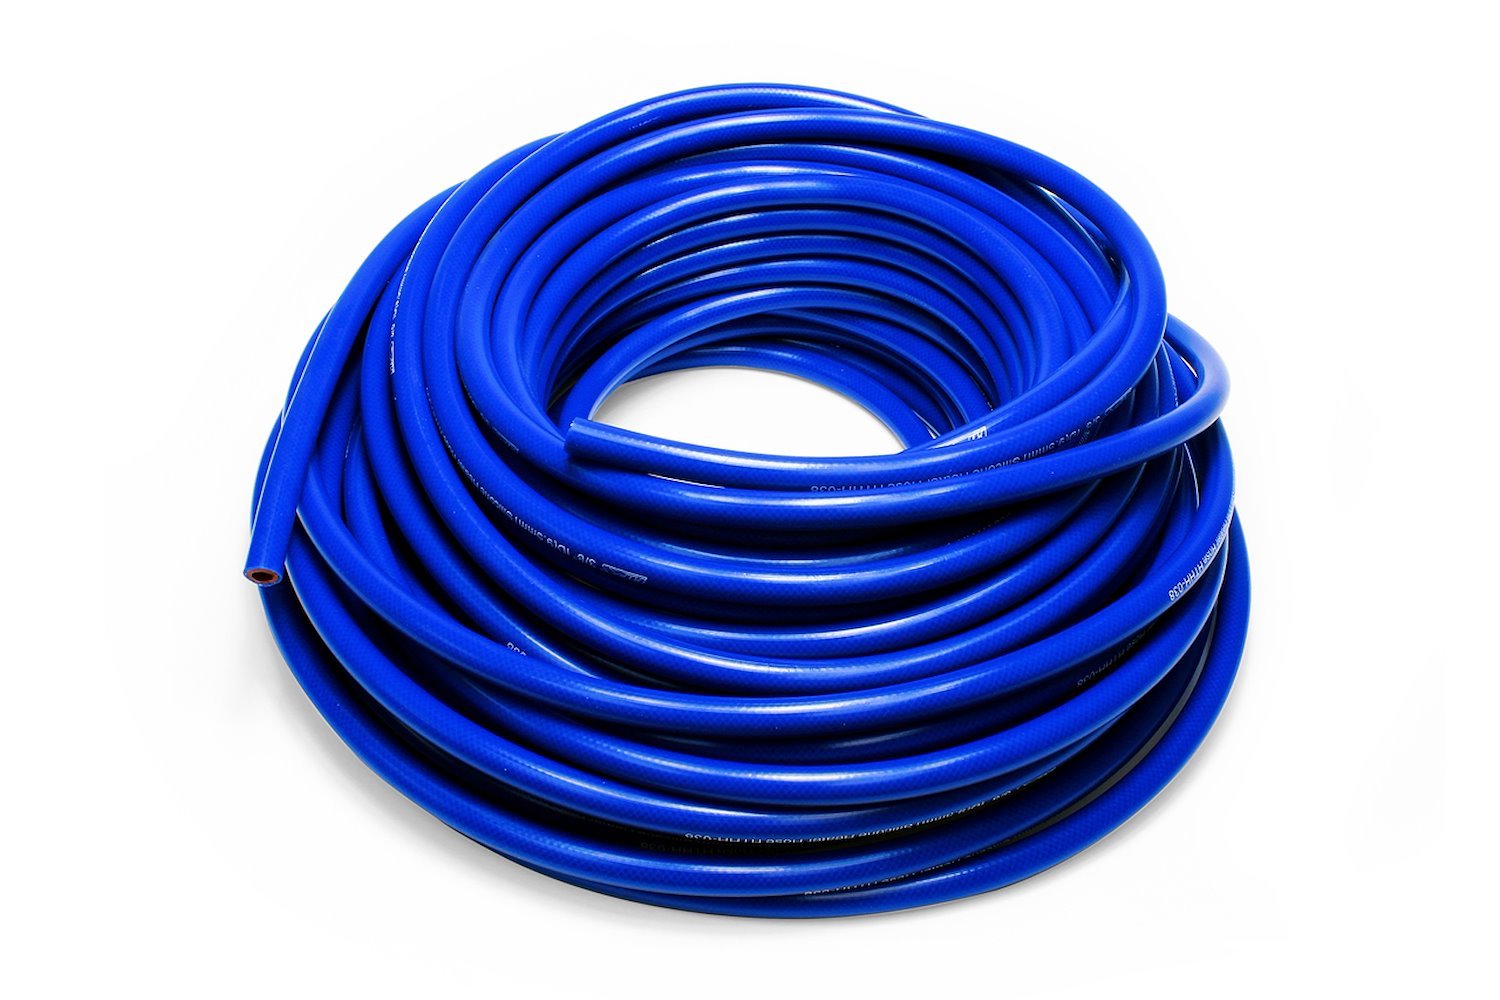 HTHH-032-BLUEx50 Silicone Heater Hose Tubing, High-Temp Reinforced, 5/16 in. ID, 50 ft. Roll, Blue